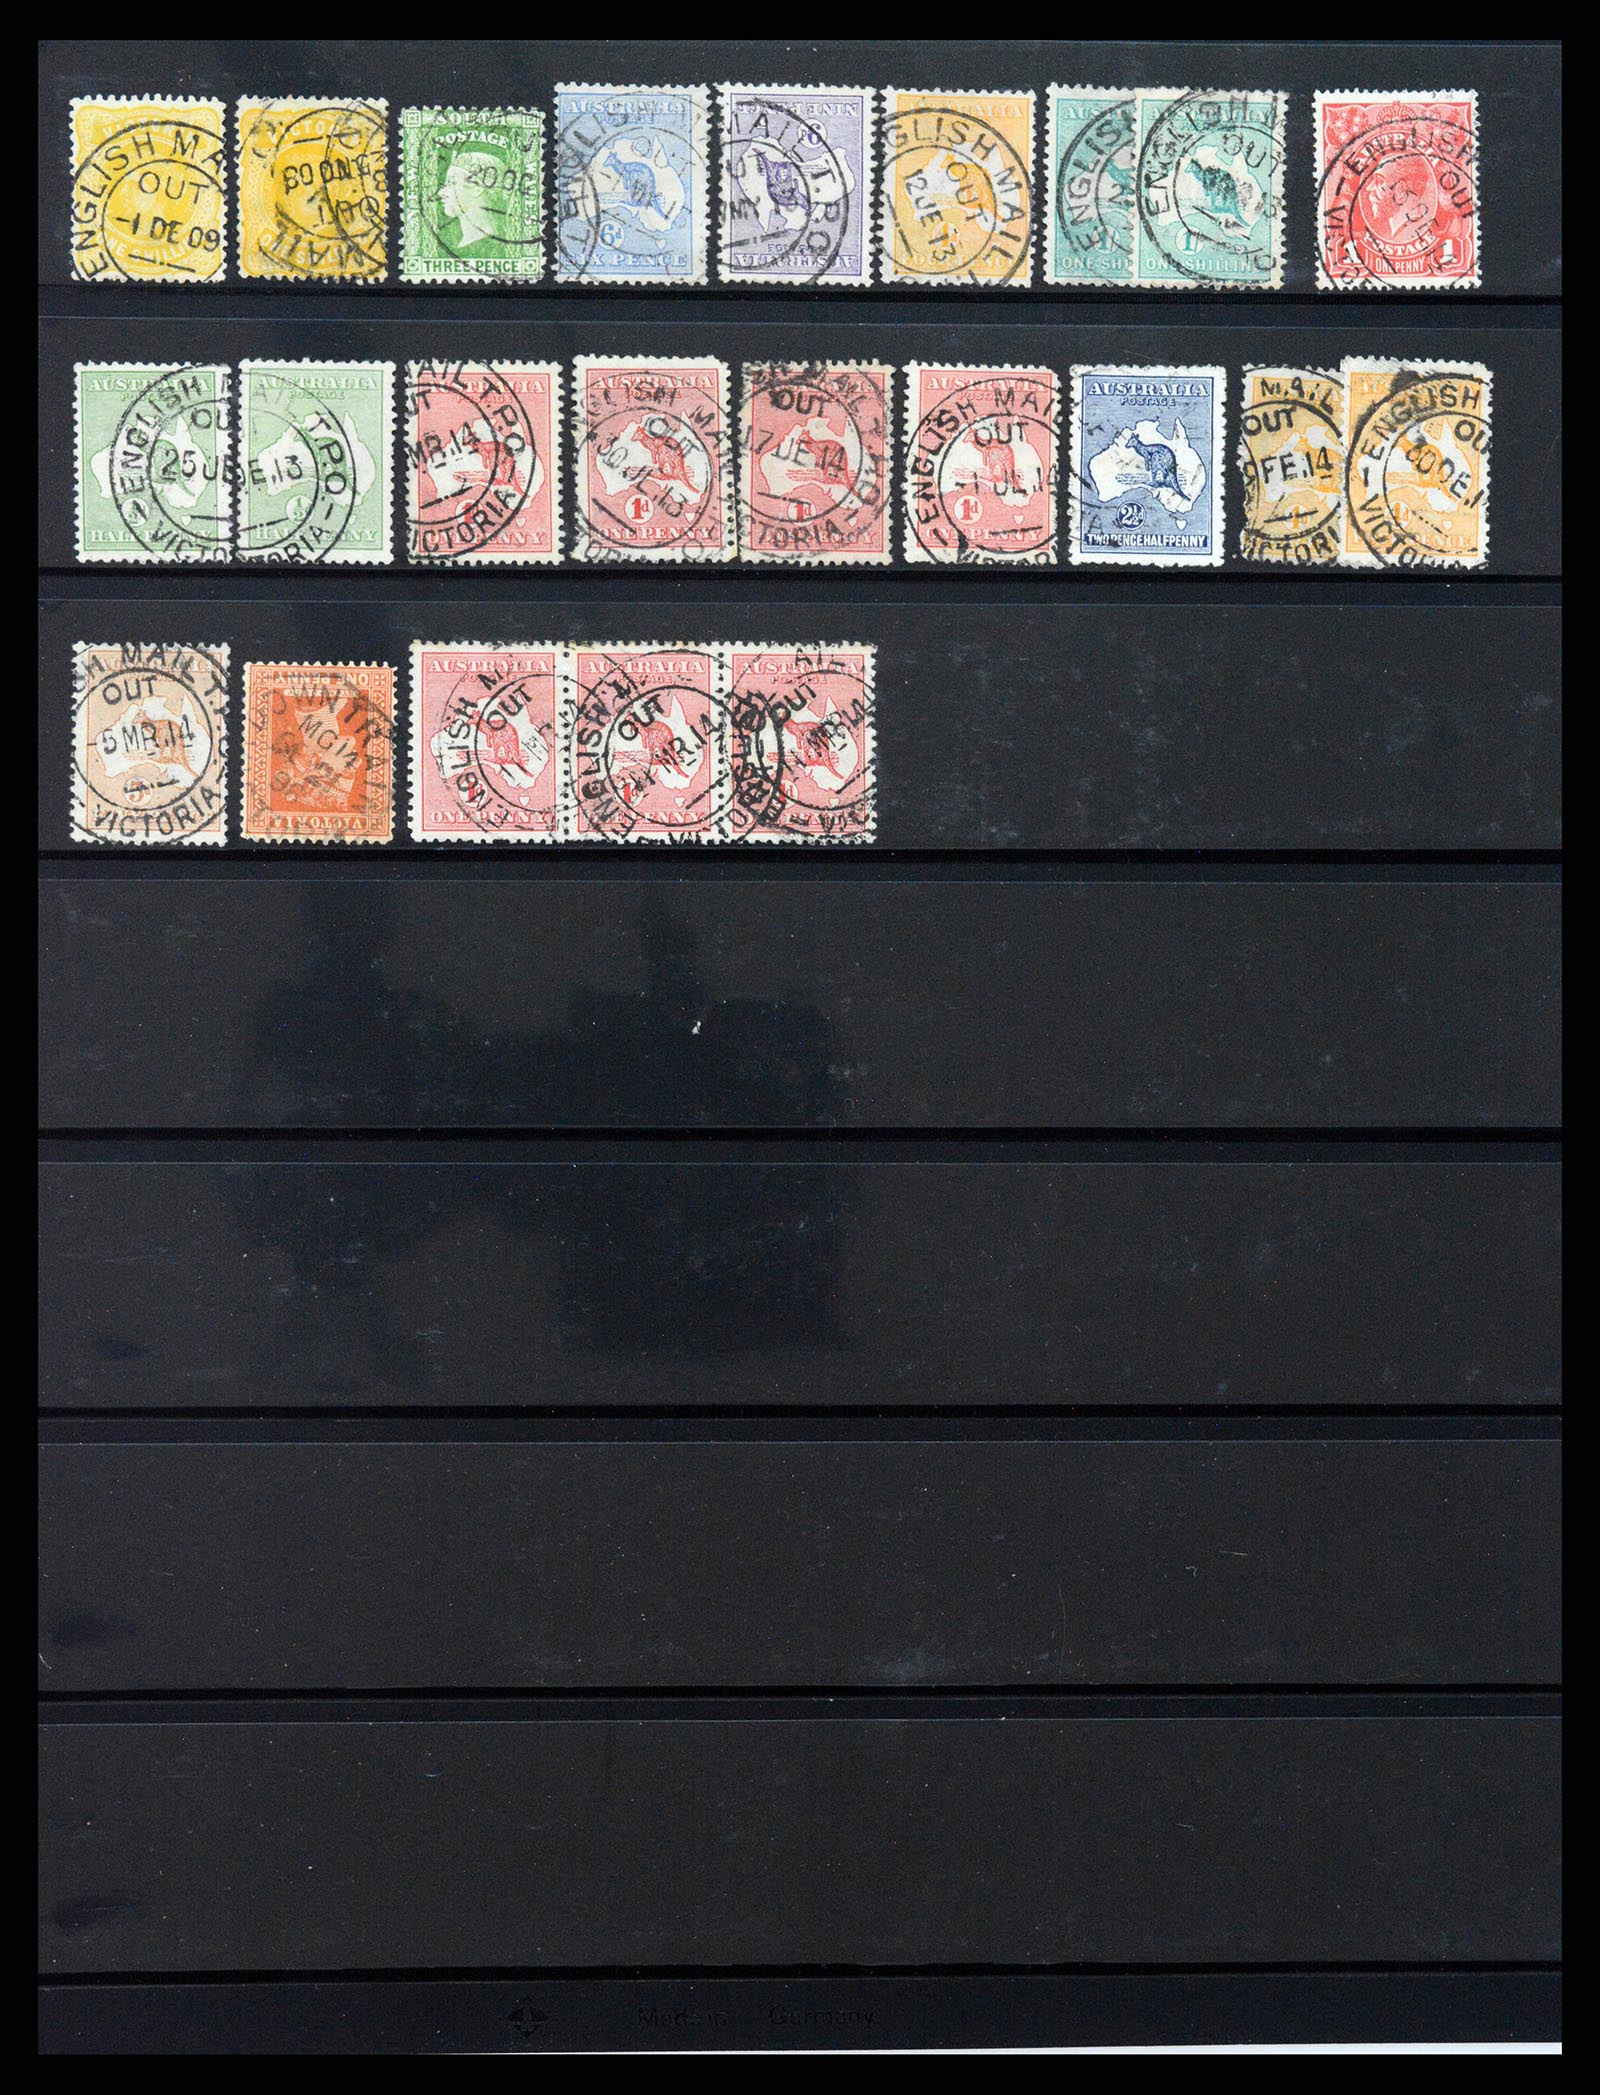 37514 033 - Stamp collection 37514 Victoria tpo cancellations 1865-1930.